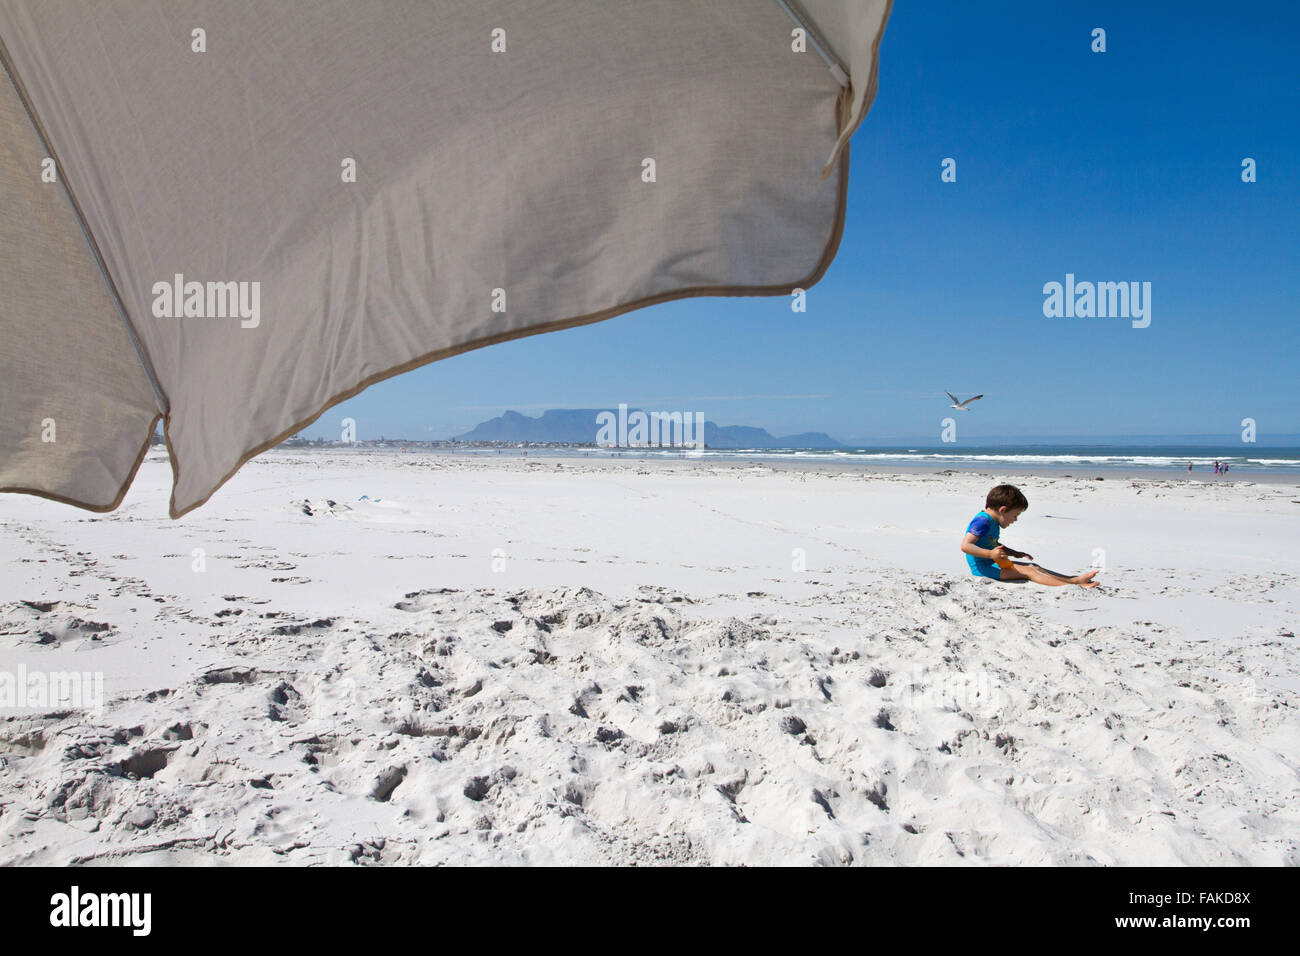 Little boy on the beach at Melkbosstrand, with Table Mountain in the background Stock Photo